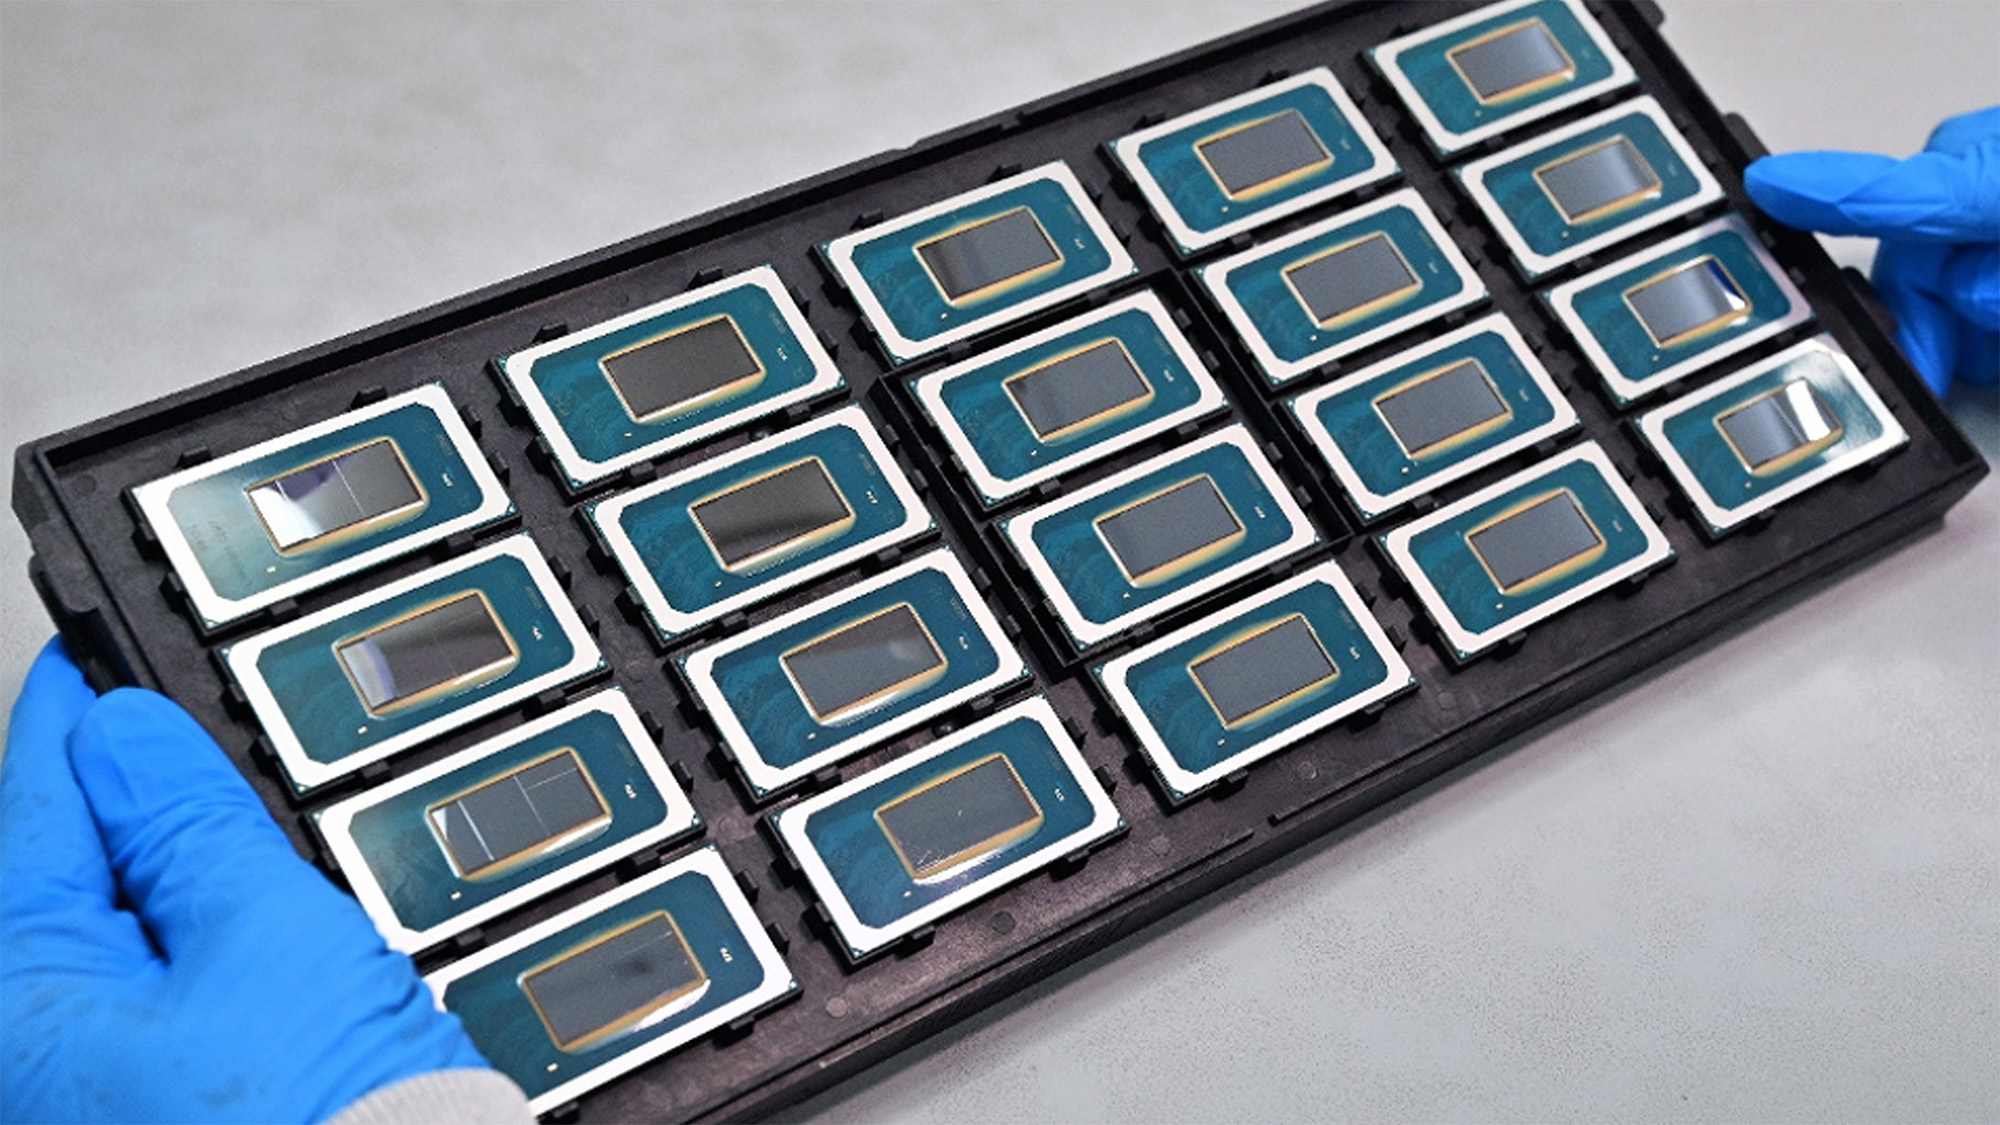 A palette of Intel Core Ultra CPUs in a tray